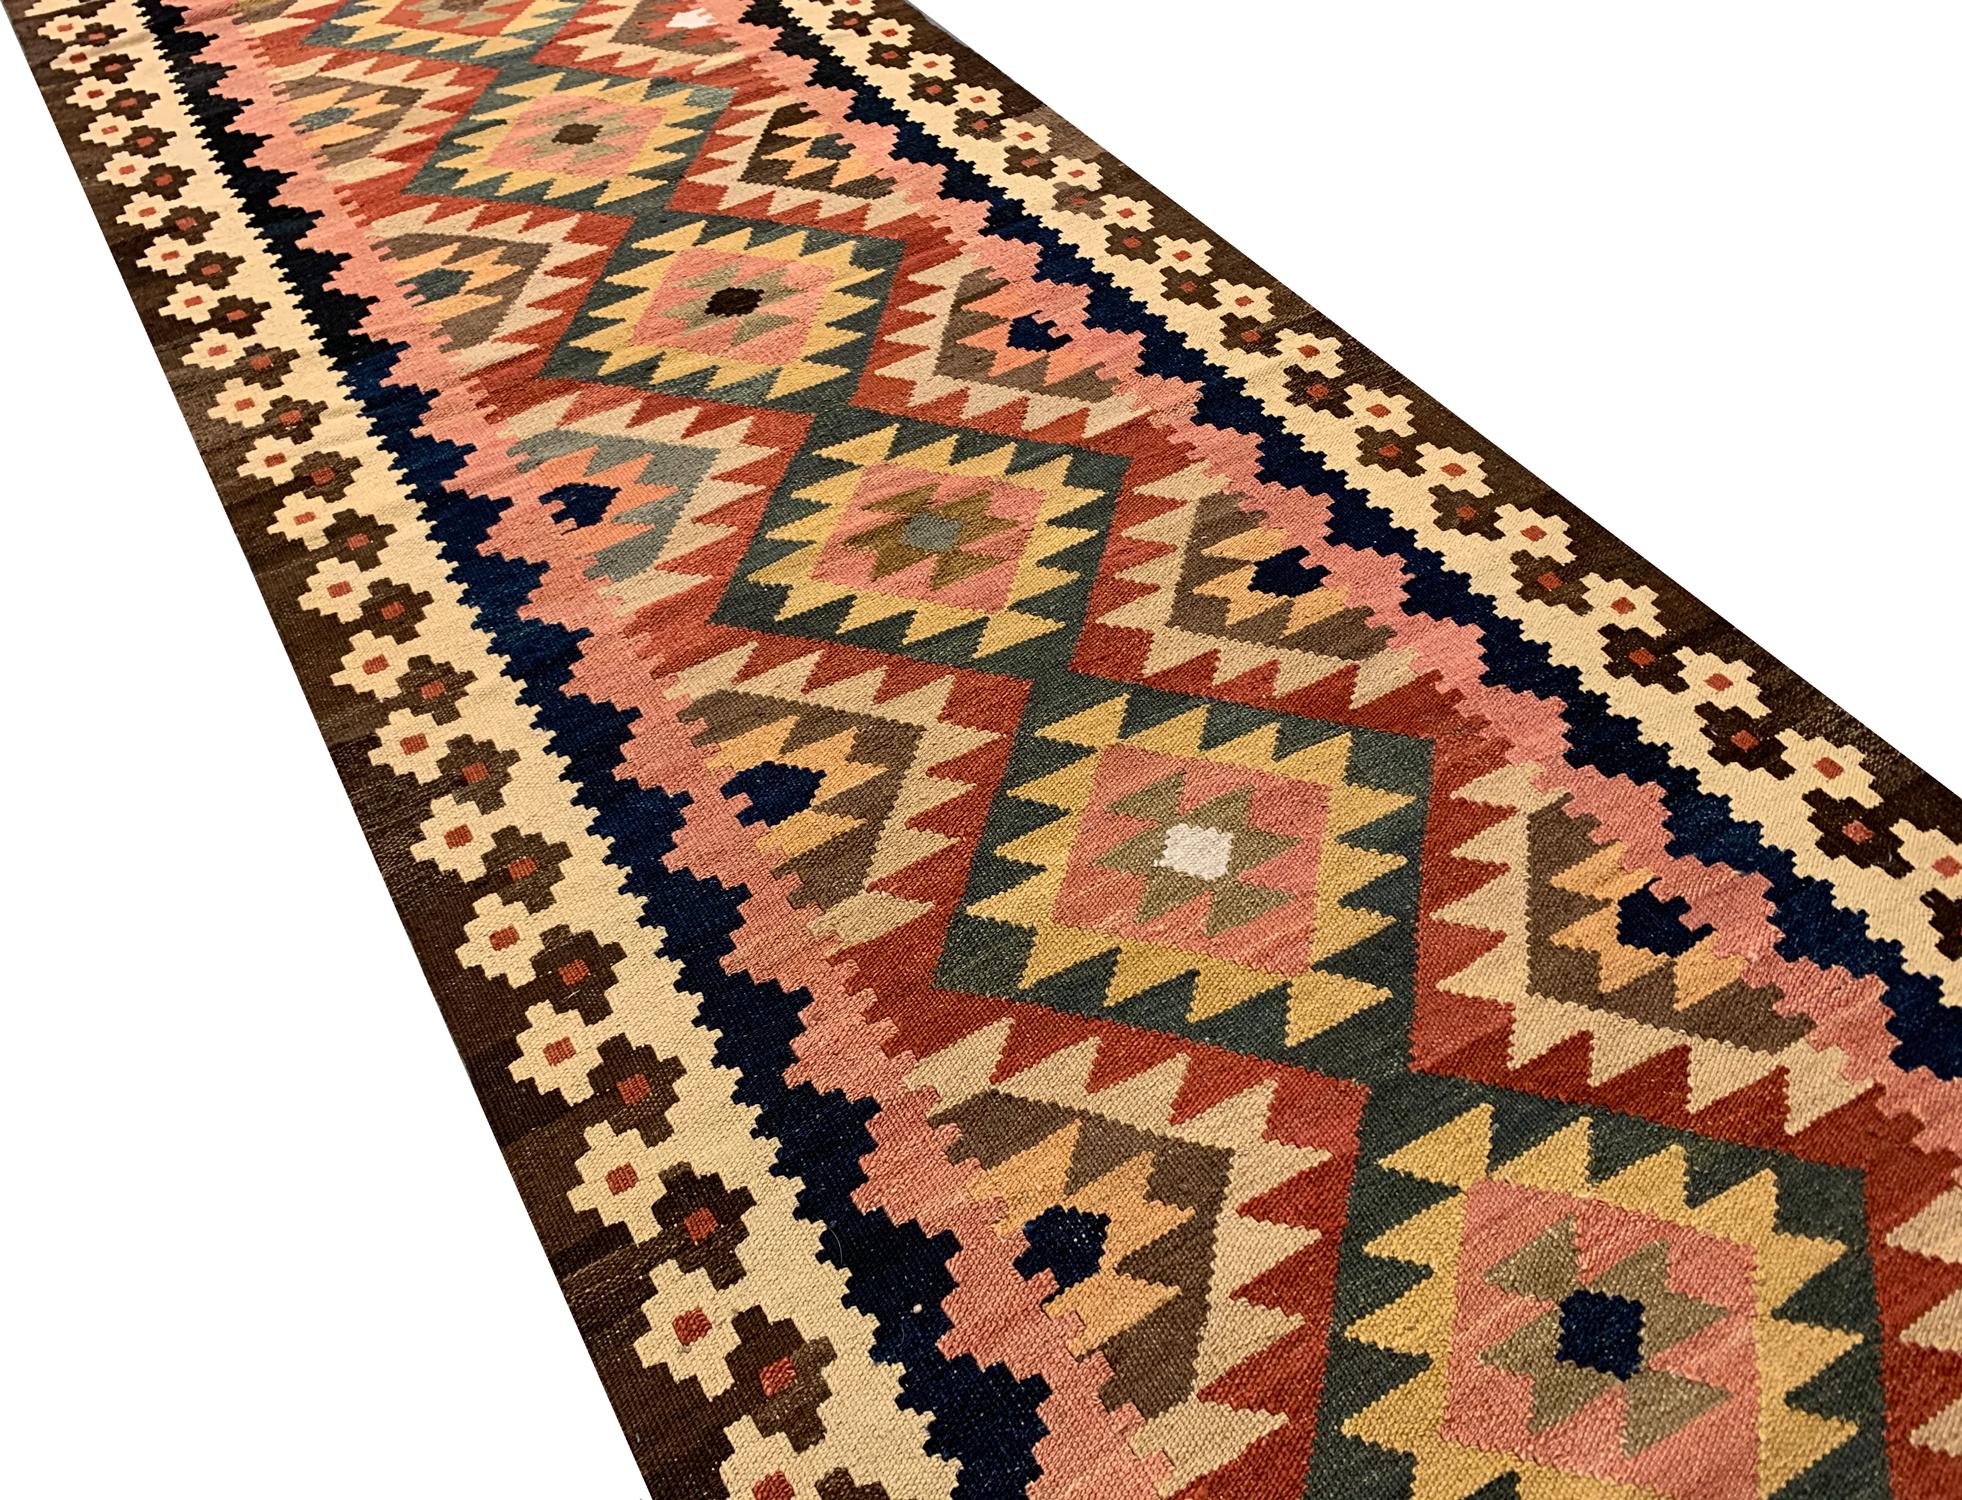 This fine wool Kilim Runner is a modern Afghan flat-weave Kilim rug constructed in the early 2000s. The design features a repeat geometric design woven with a vibrant colour palette including green, rust, beige and brown that make up the repeat